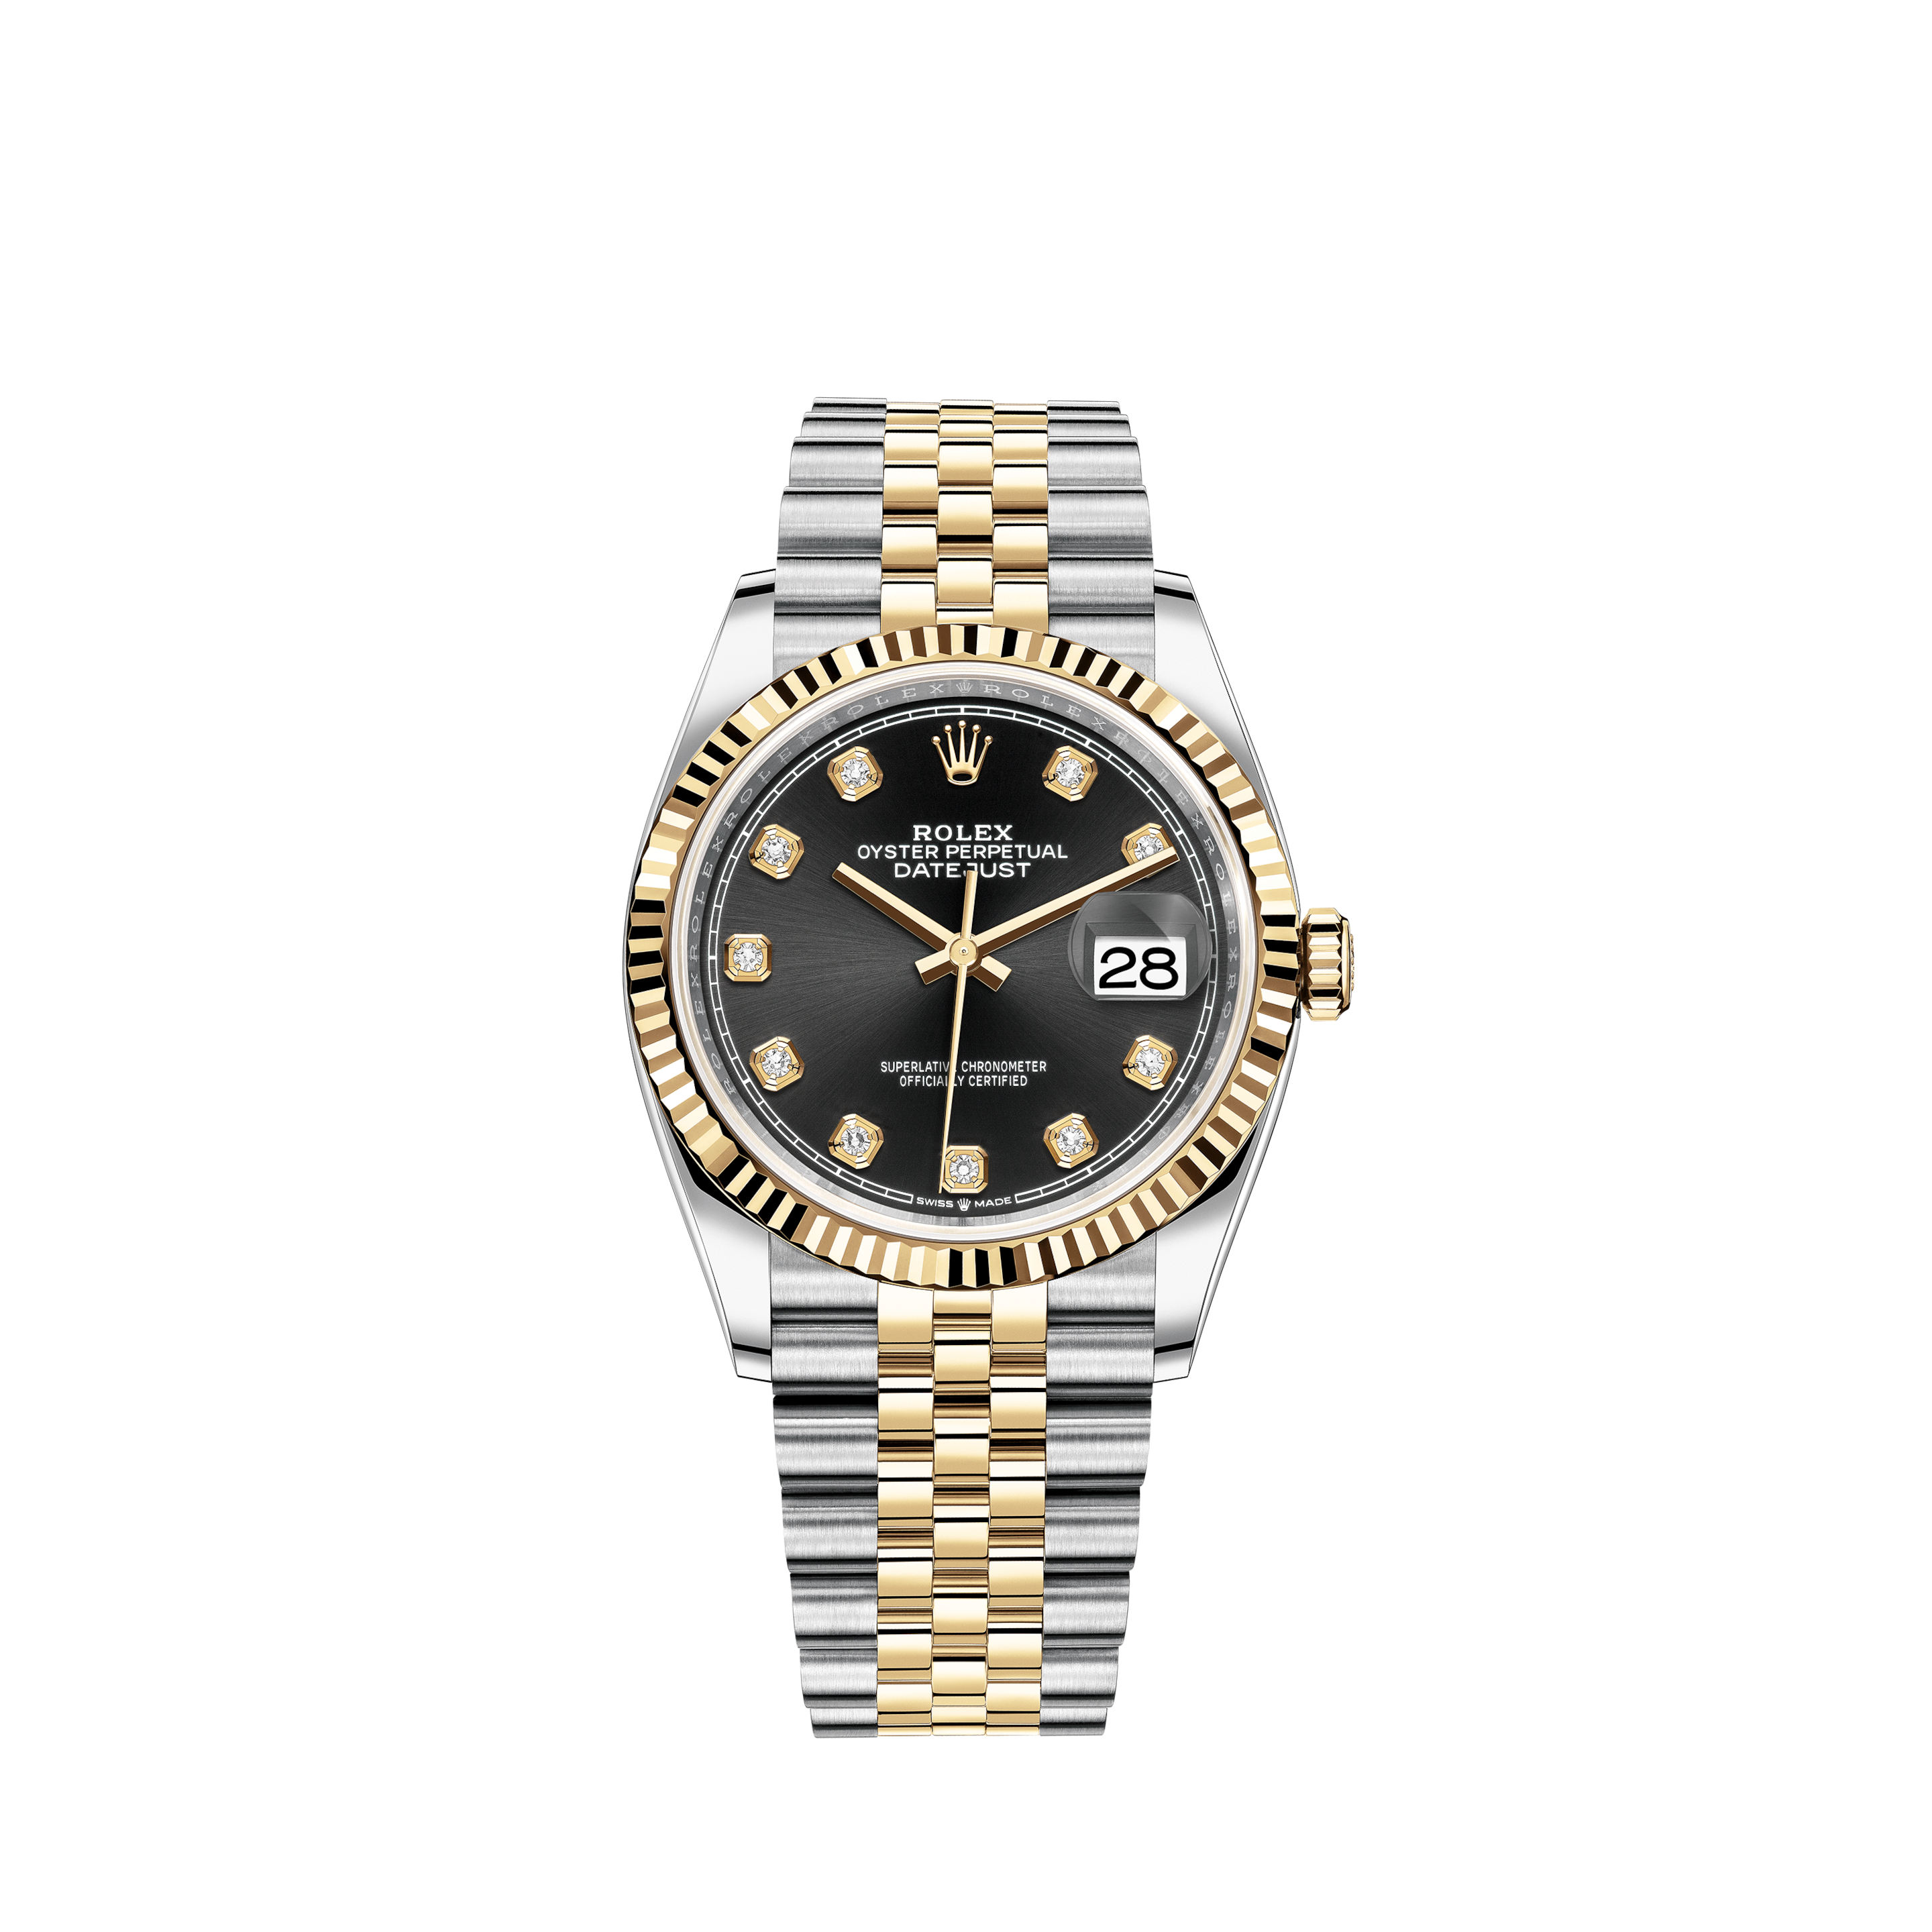 Rolex OYSTER PERPETUAL TIFFANY-FULL STIKERS -41MM-ACCIAIO-REF 124300-NEW 2021-FULL SETRolex OYSTER PERPETUAL ref:116000, Box & Papers, serial 919xxx